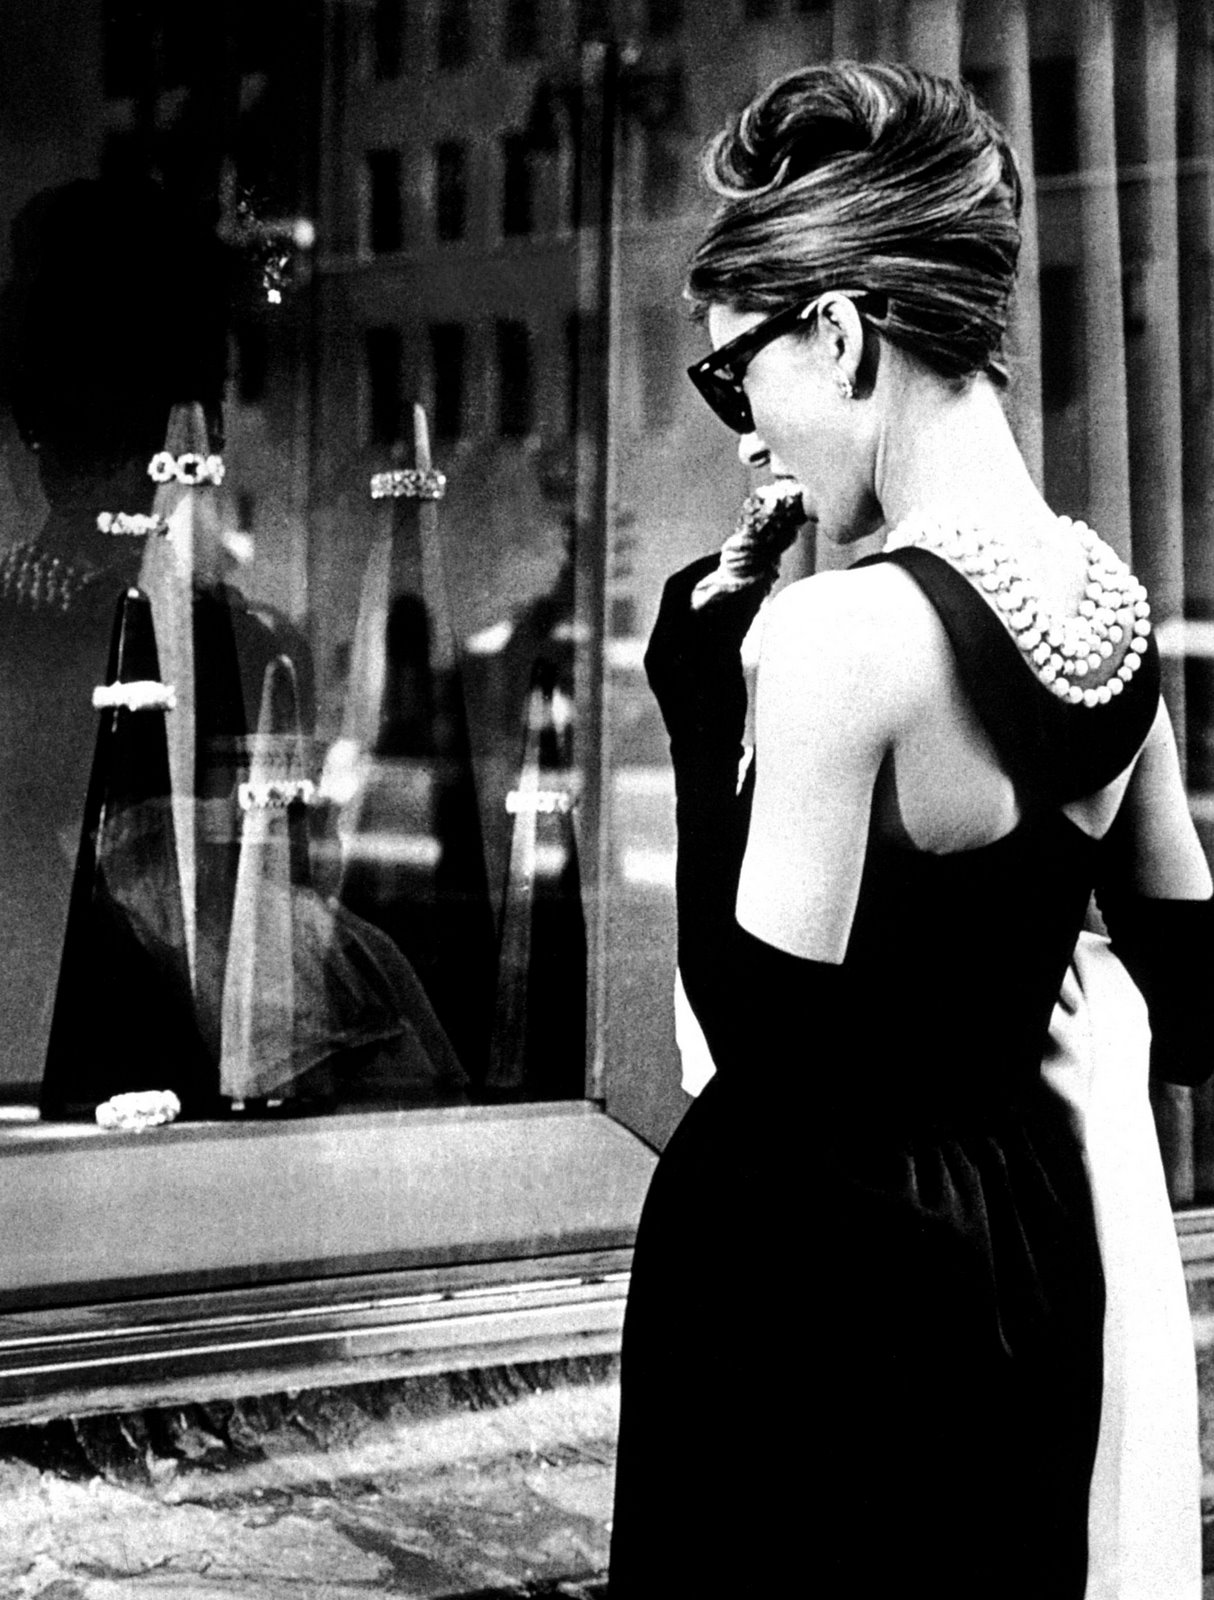 HOW TO DRESS UP A LITTLE BLACK DRESS TO LOOK LIKE AUDREY HEPBURN